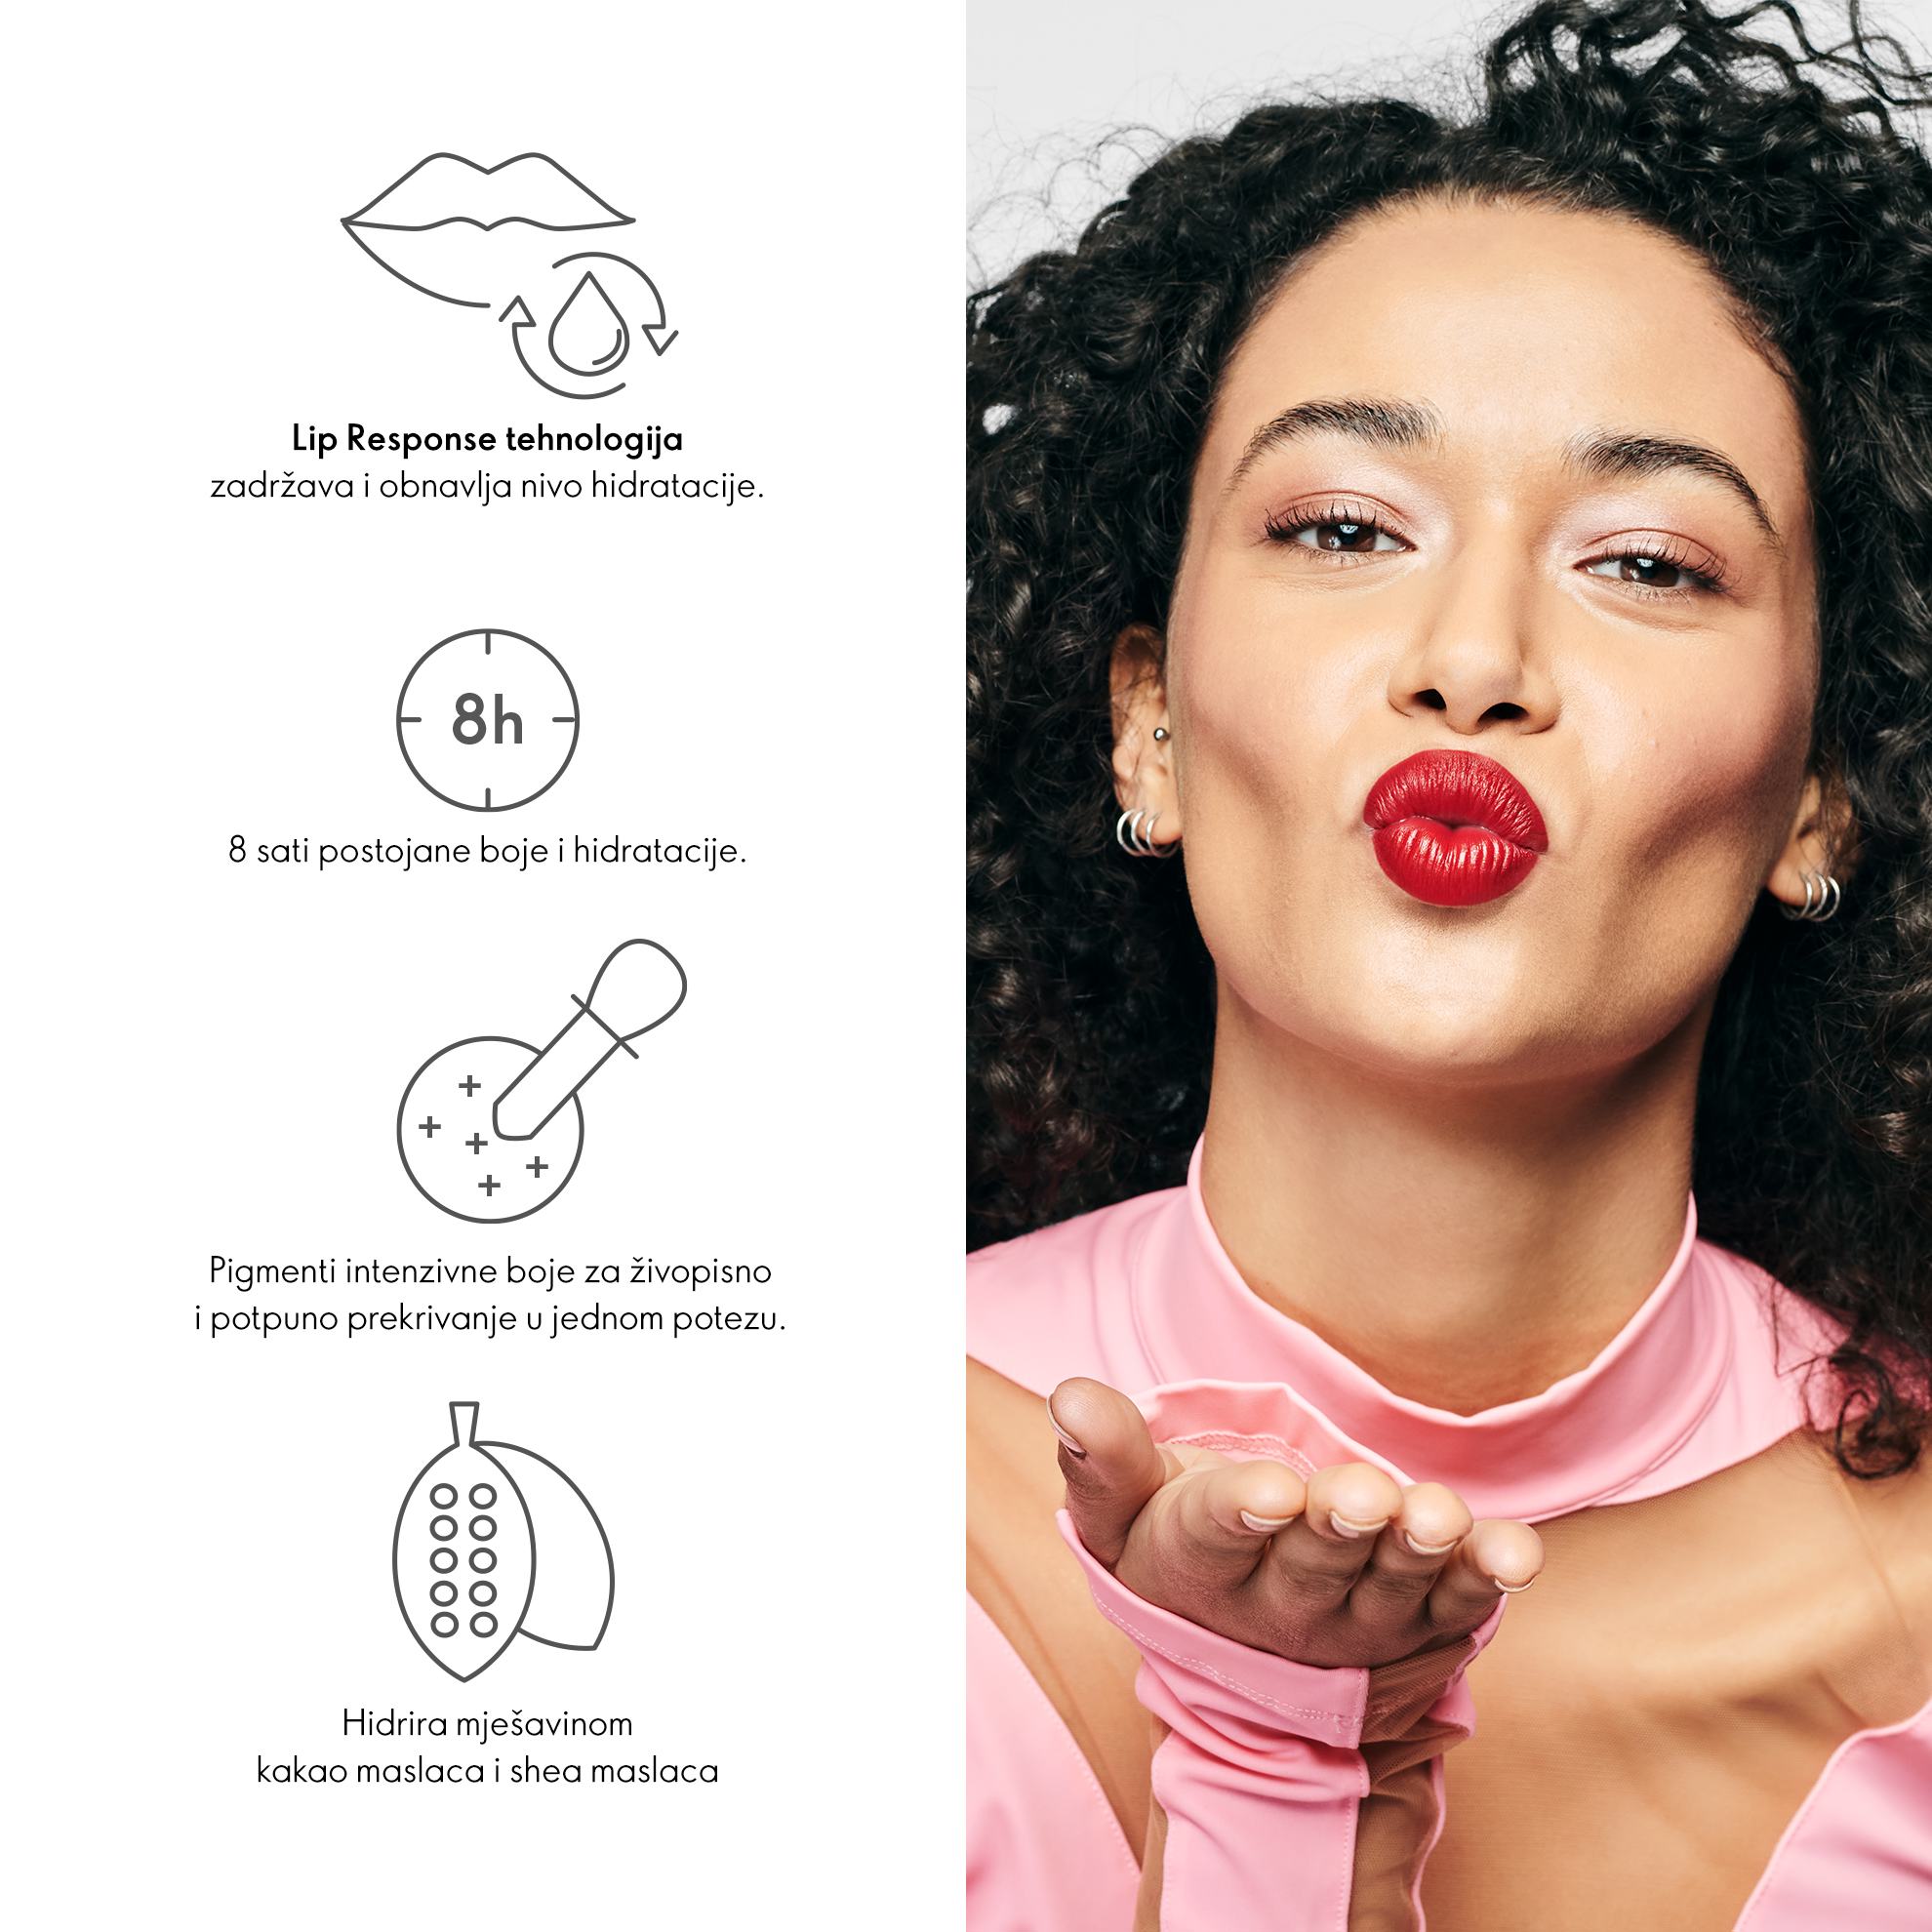 https://media-cdn.oriflame.com/productImage?externalMediaId=product-management-media%2fProducts%2f46436%2fBA%2f46436_2.png&id=18912731&version=3